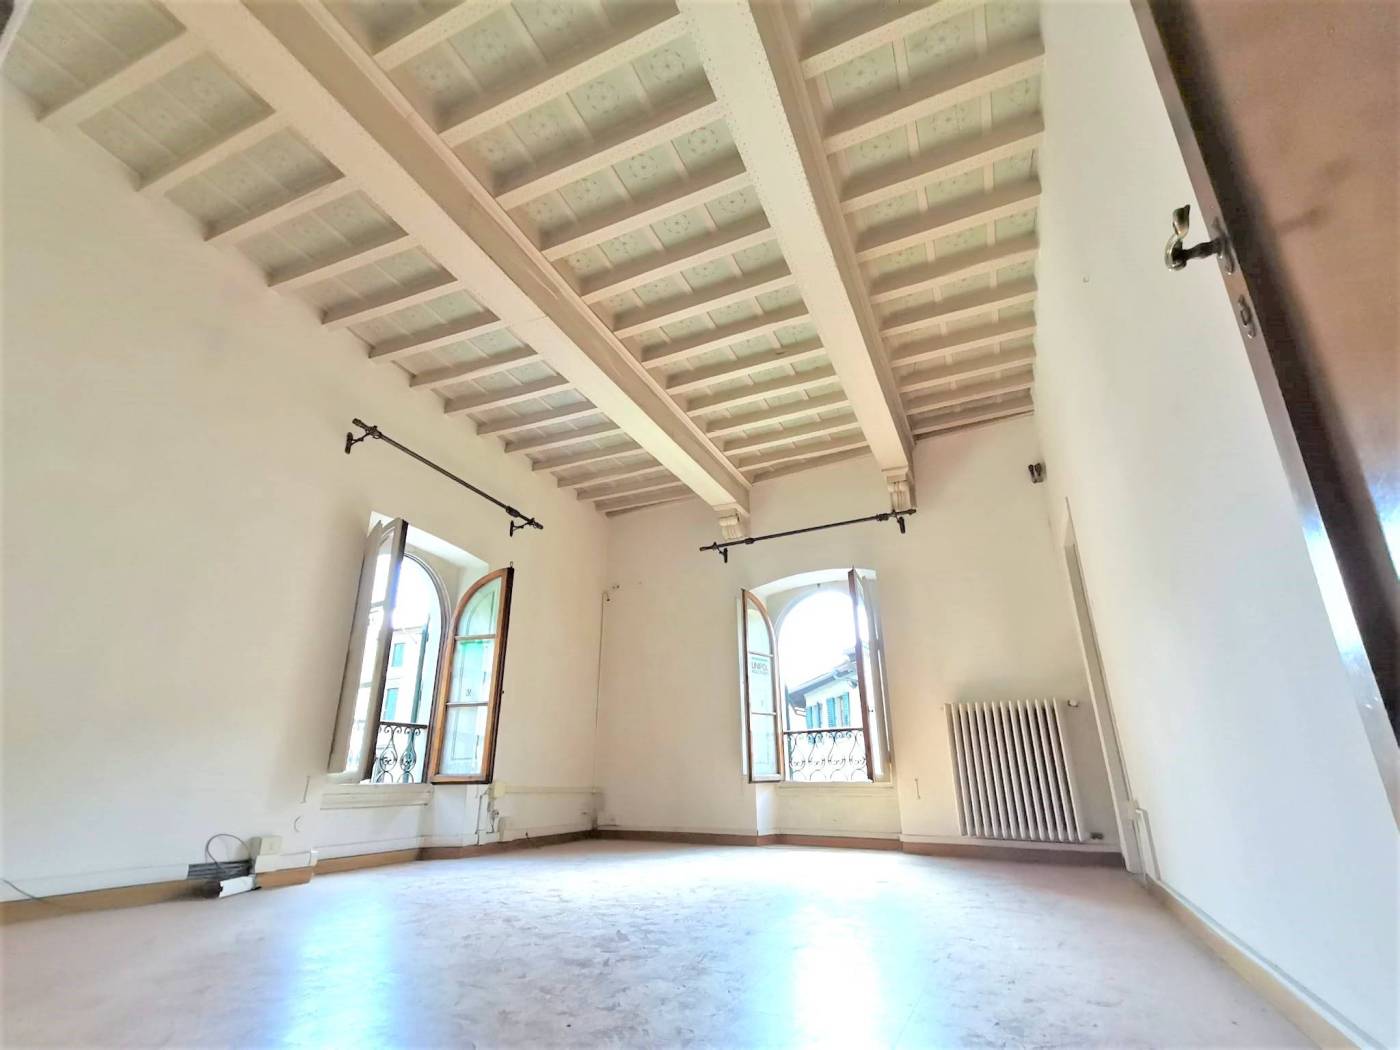 REF: VE000ZESCALL, S. CASCIANO CENTRO, NS EXCLUSIVE, Portion of the building 230 m2. Balcony. Eu.319,000 In San Casciano, a town between the valleys 